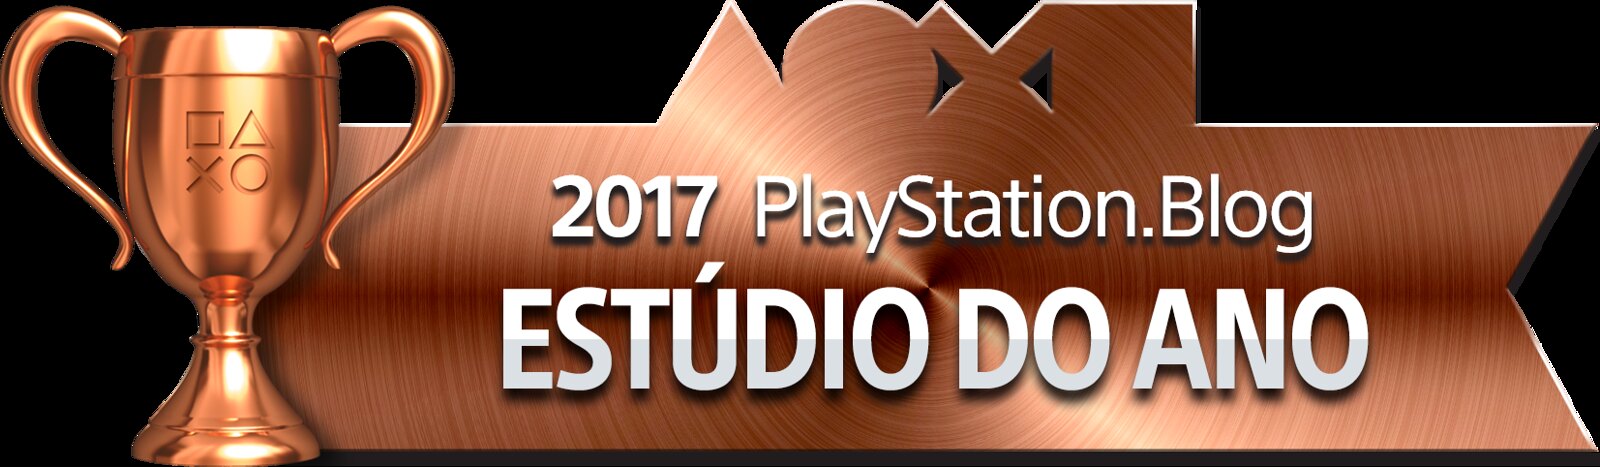 PlayStation Blog Game of the Year 2017 - Studio of the Year (Bronze)